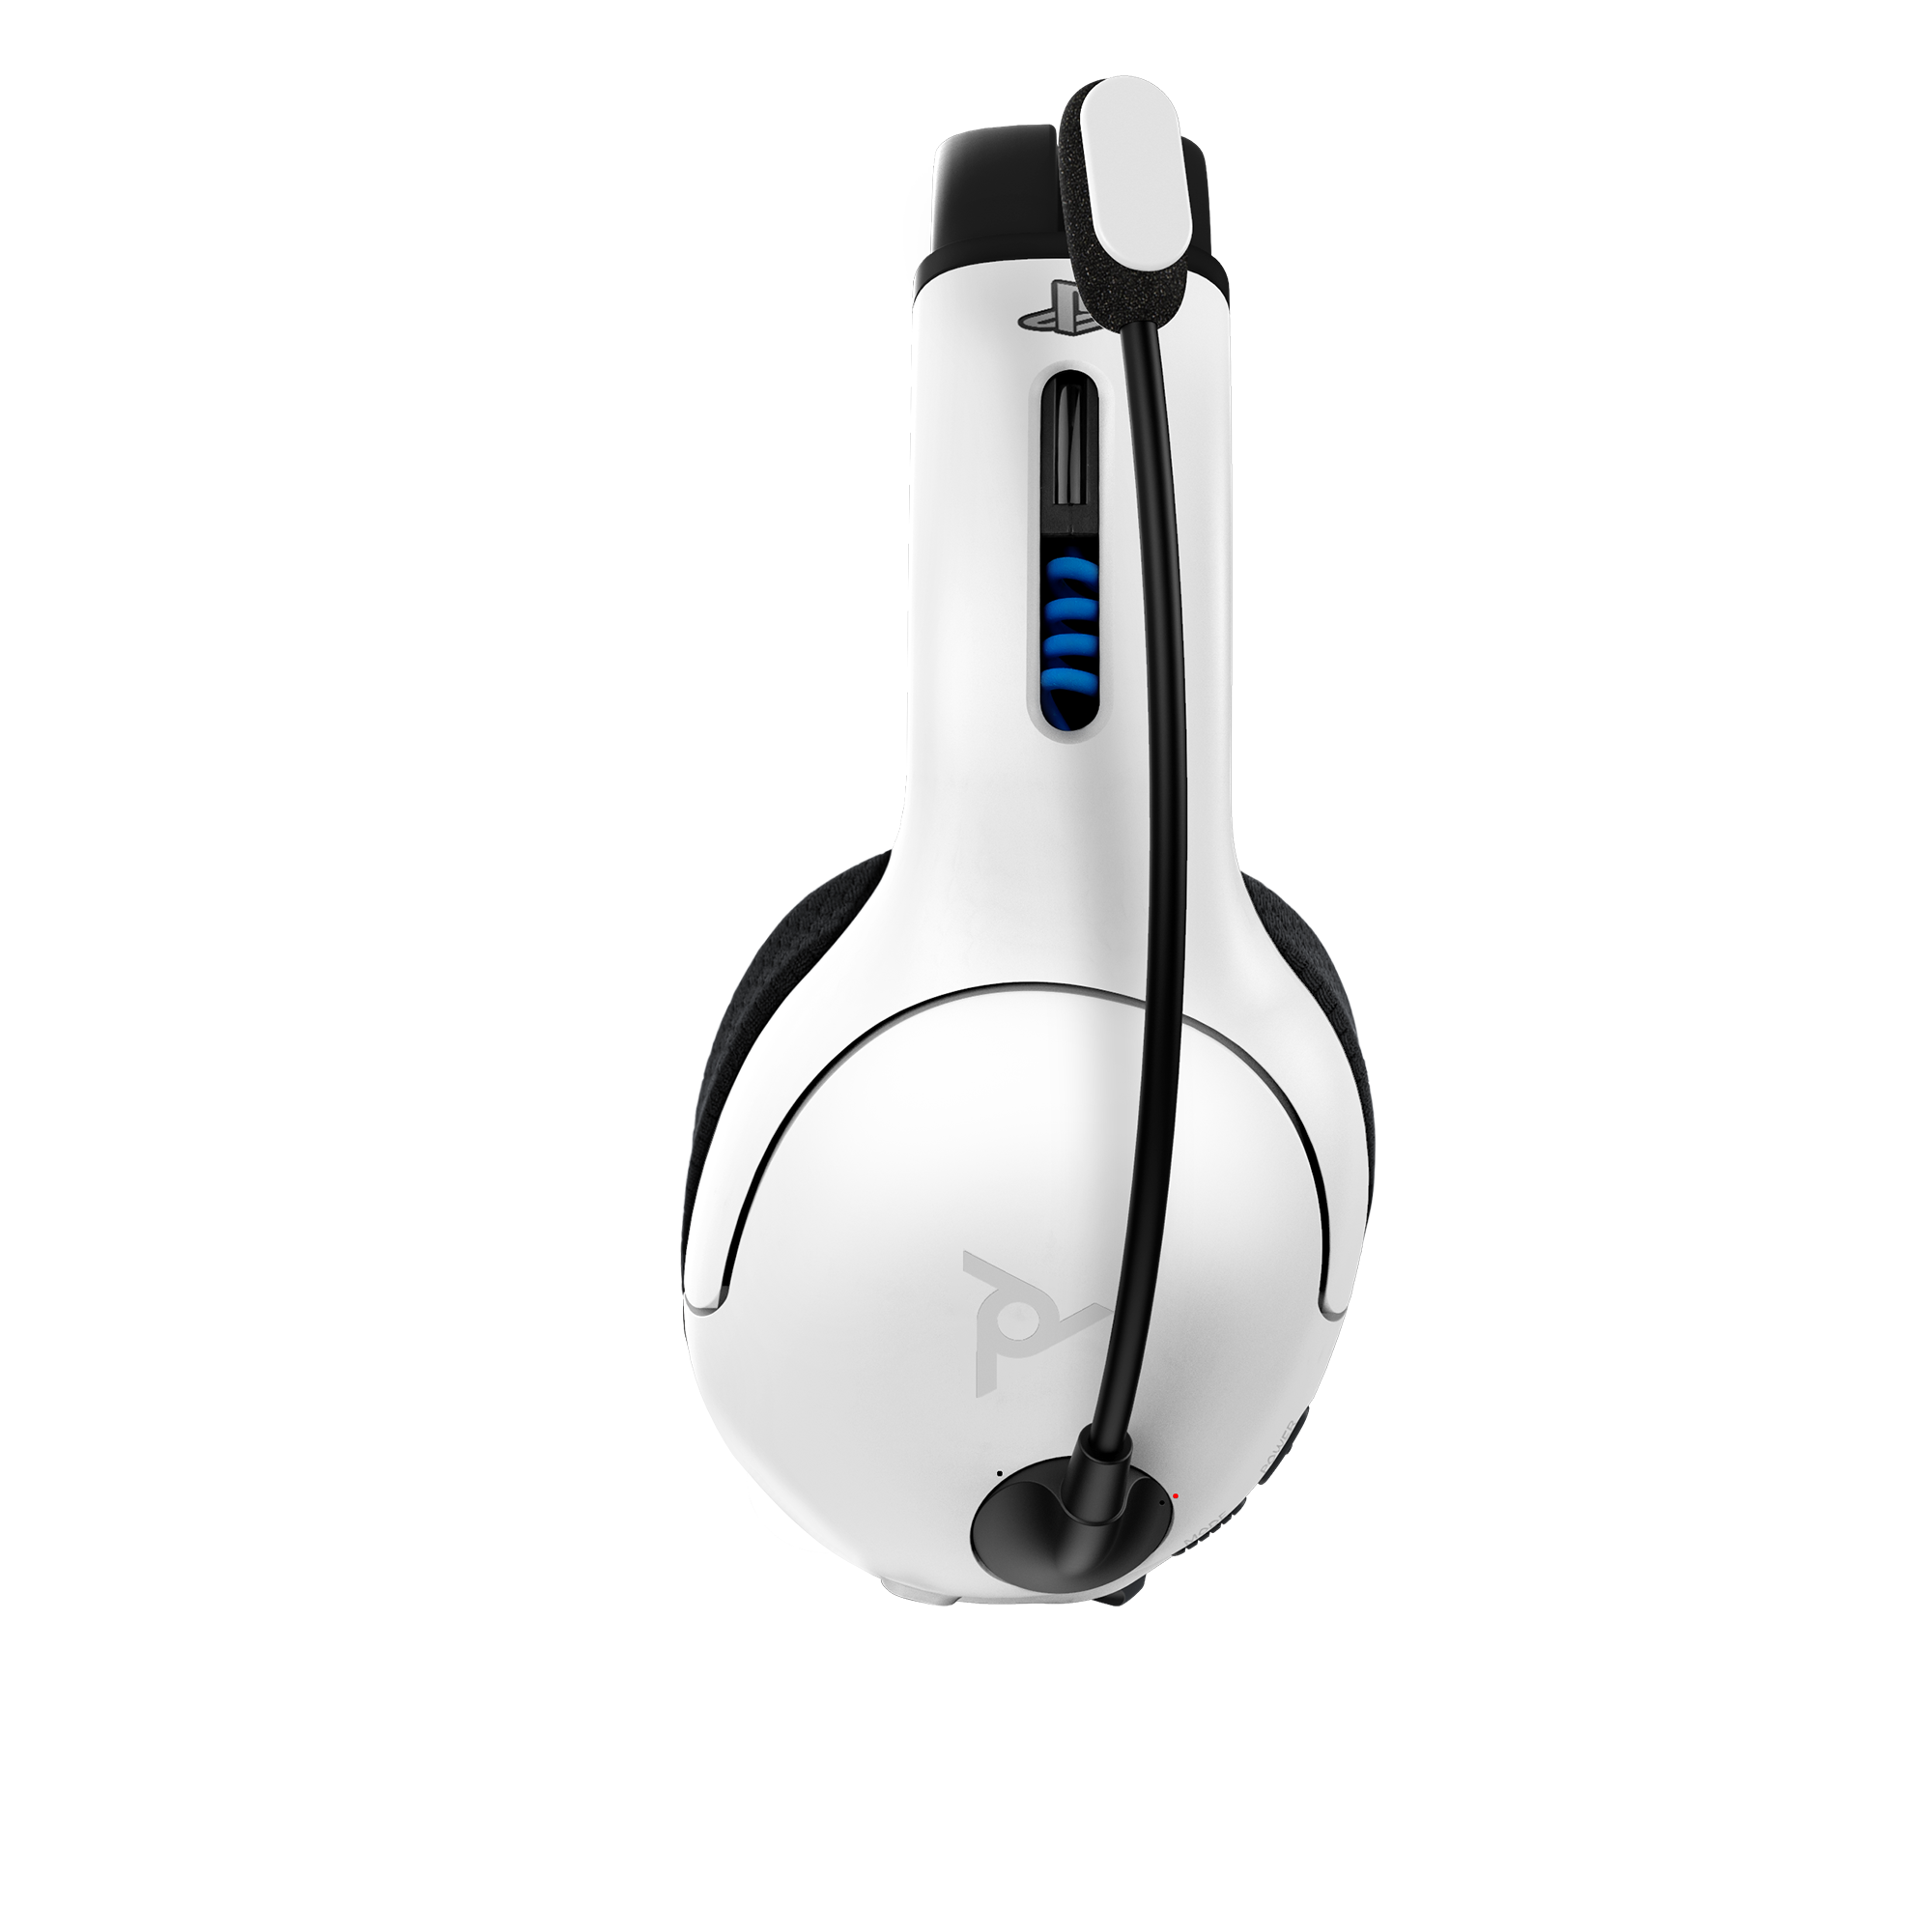 PDP Gaming LVL50 Wireless Stereo Headset for PlayStation 4 White